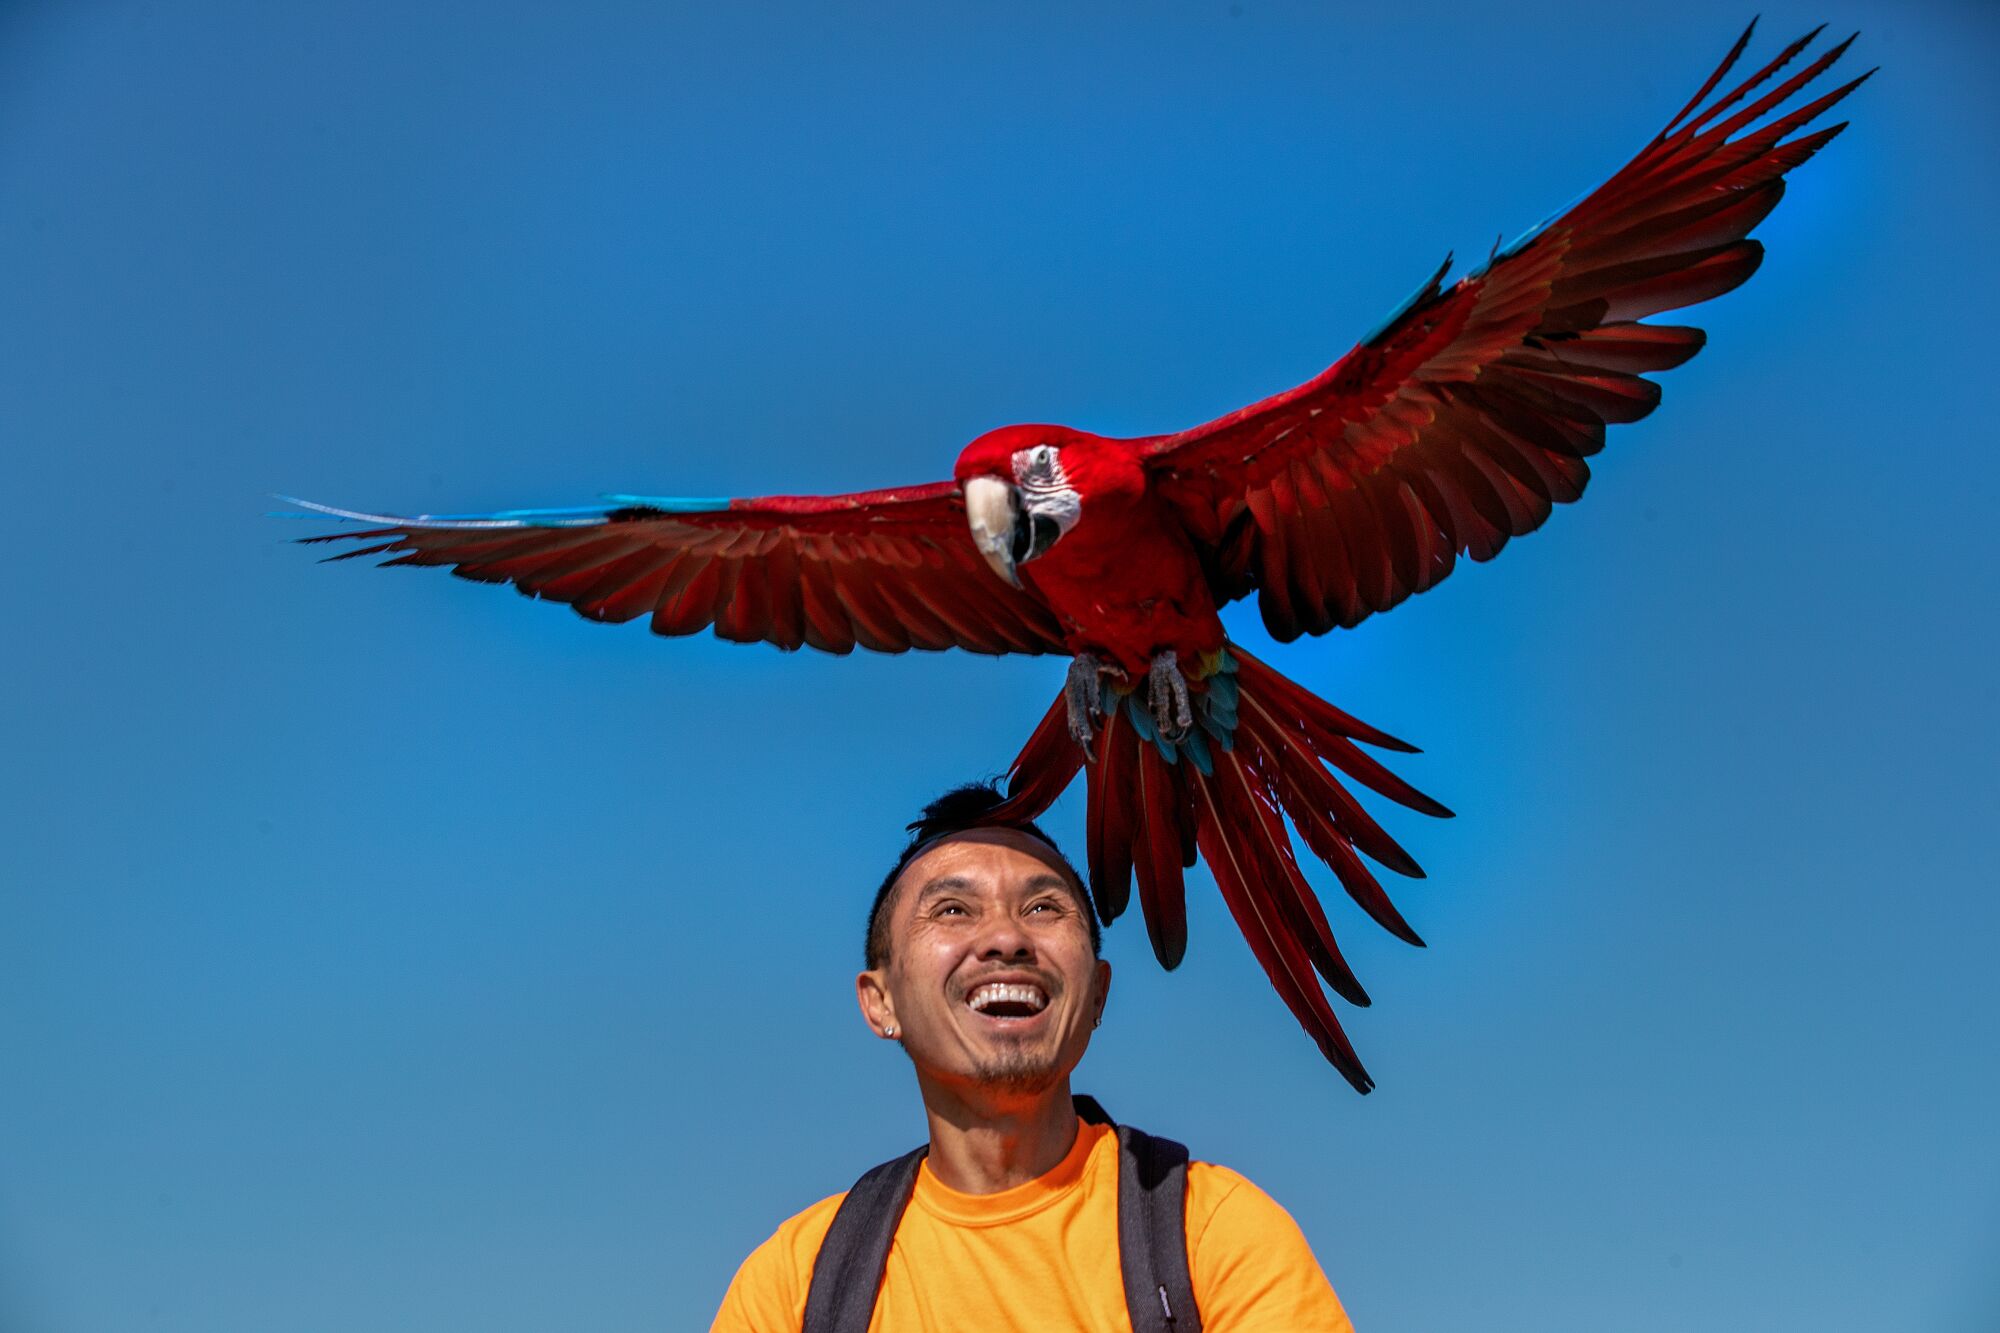 A man in a yellow shirt with a scarlet macaw flying above his head.